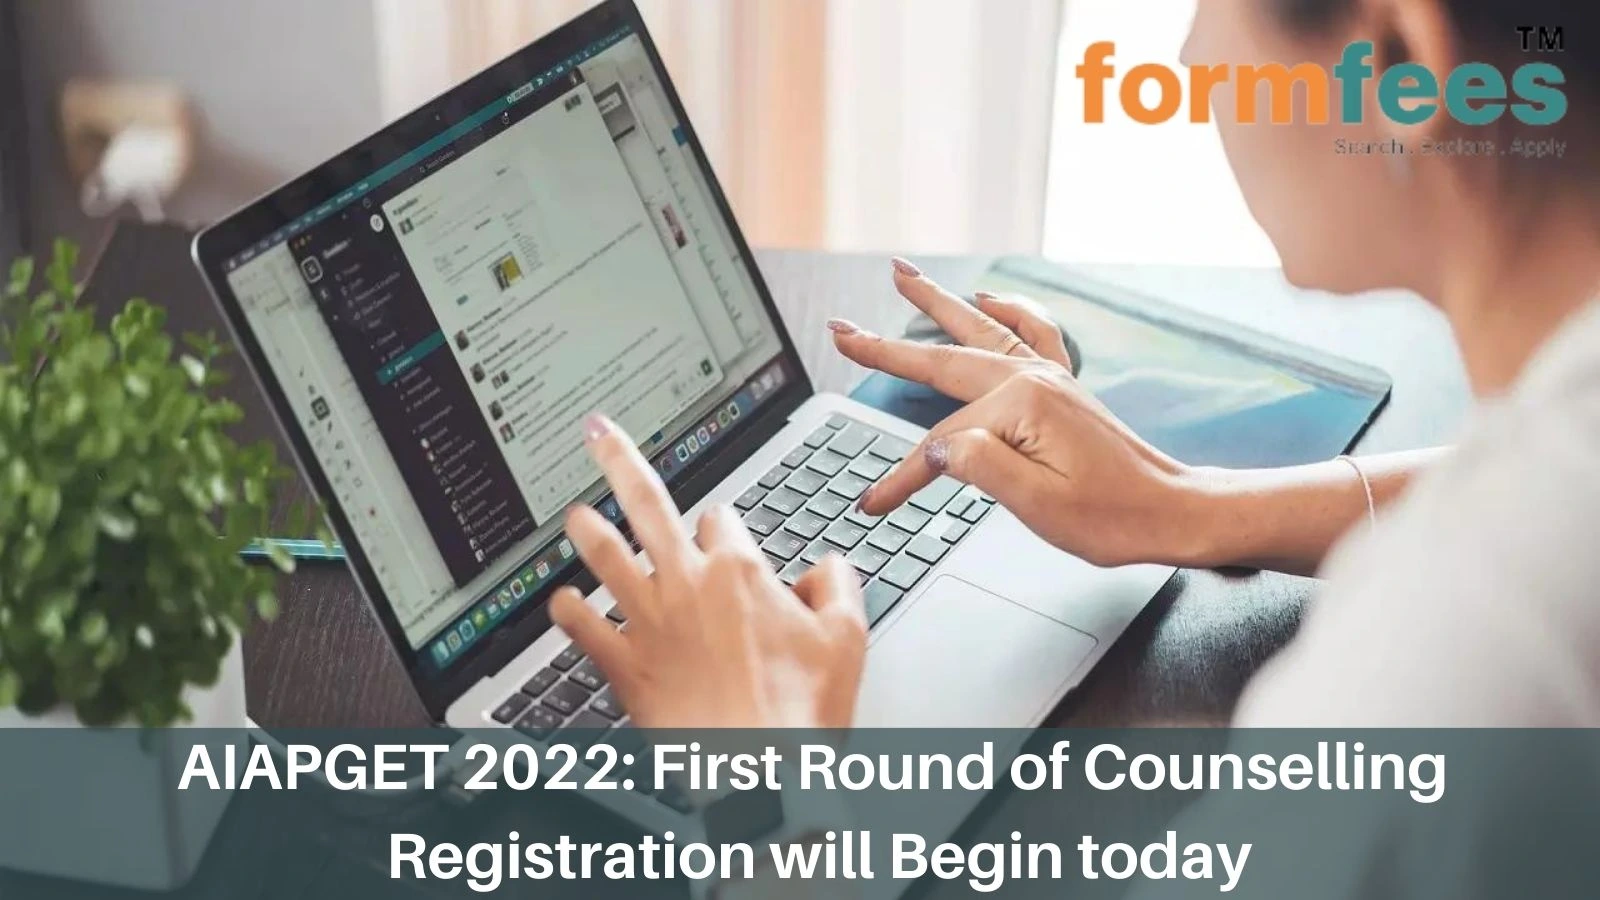 AIAPGET 2022: First Round of Counselling Registration will Begin today